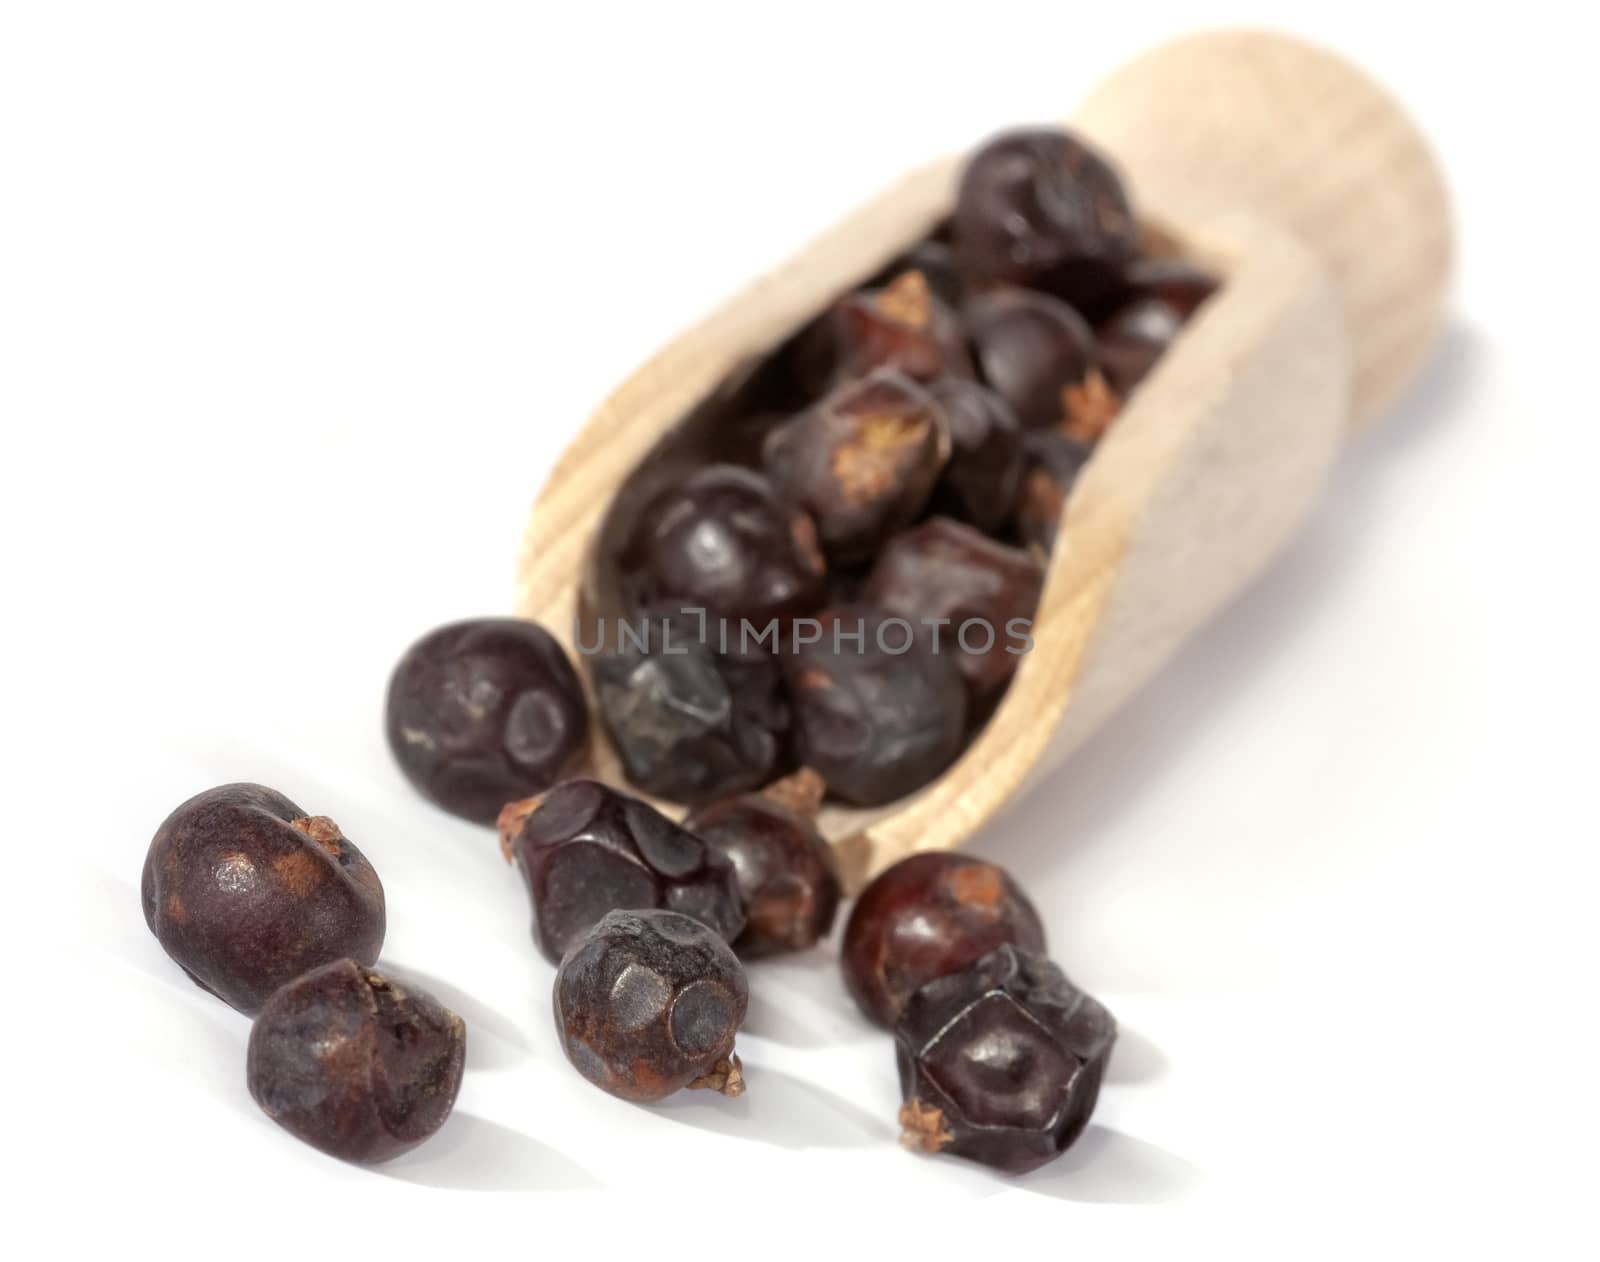 Dried juniper berries isolated on white. Soft focus view. Close up.